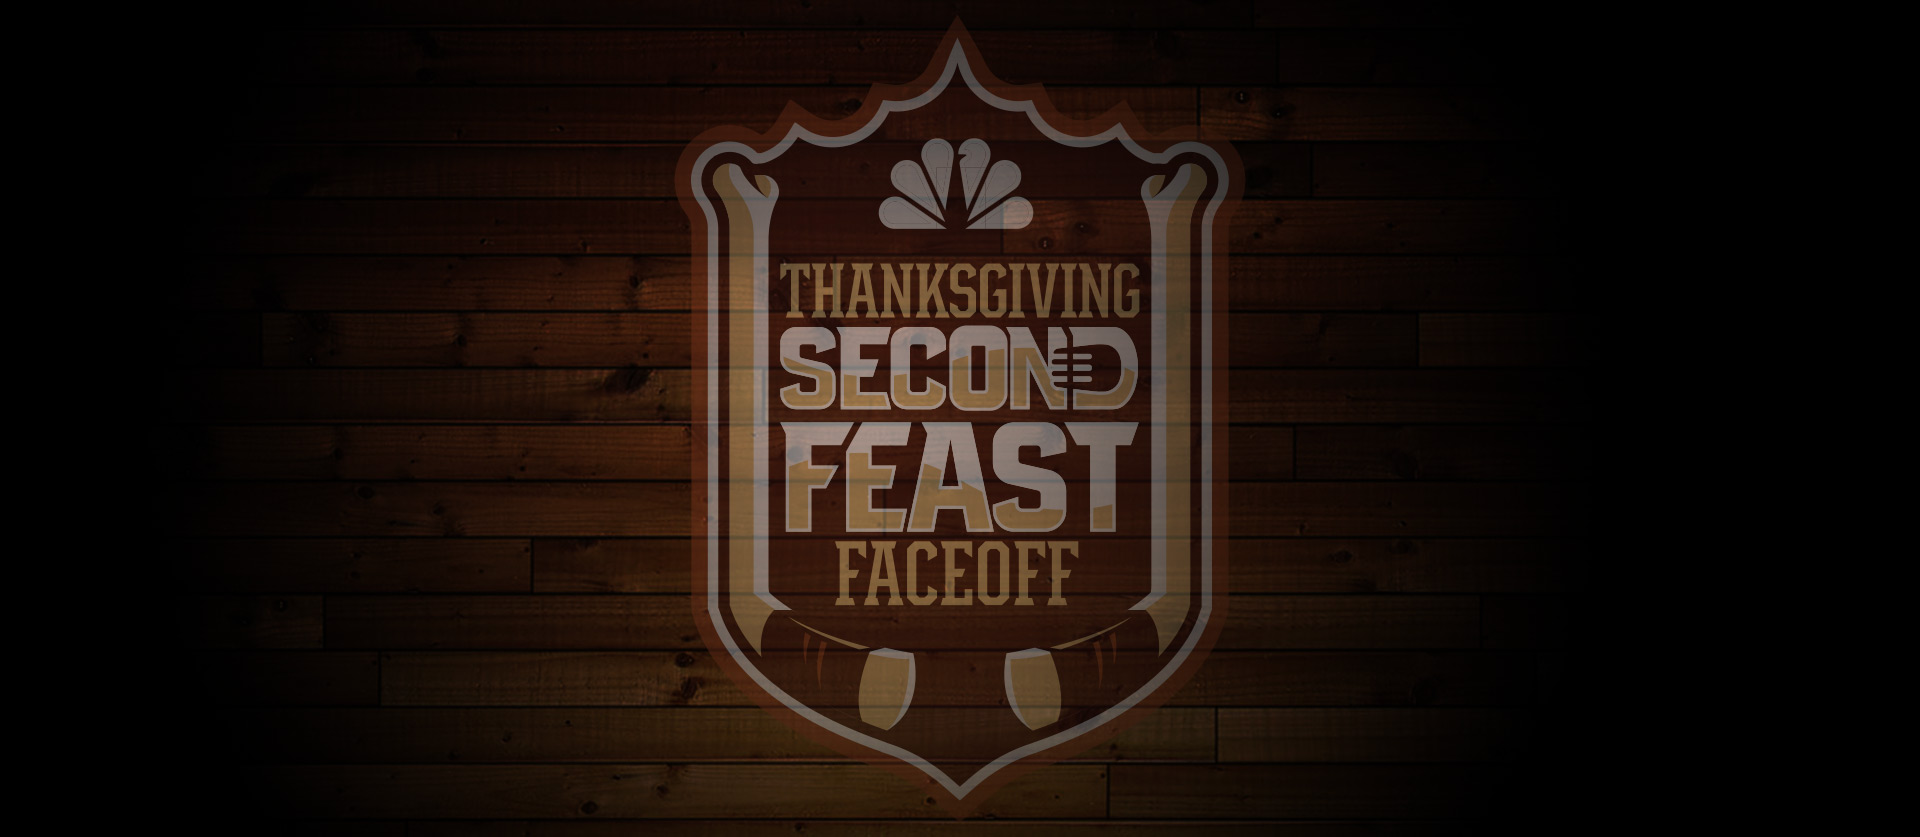 NBC Sports Second Feast Face-off - Full Project Details